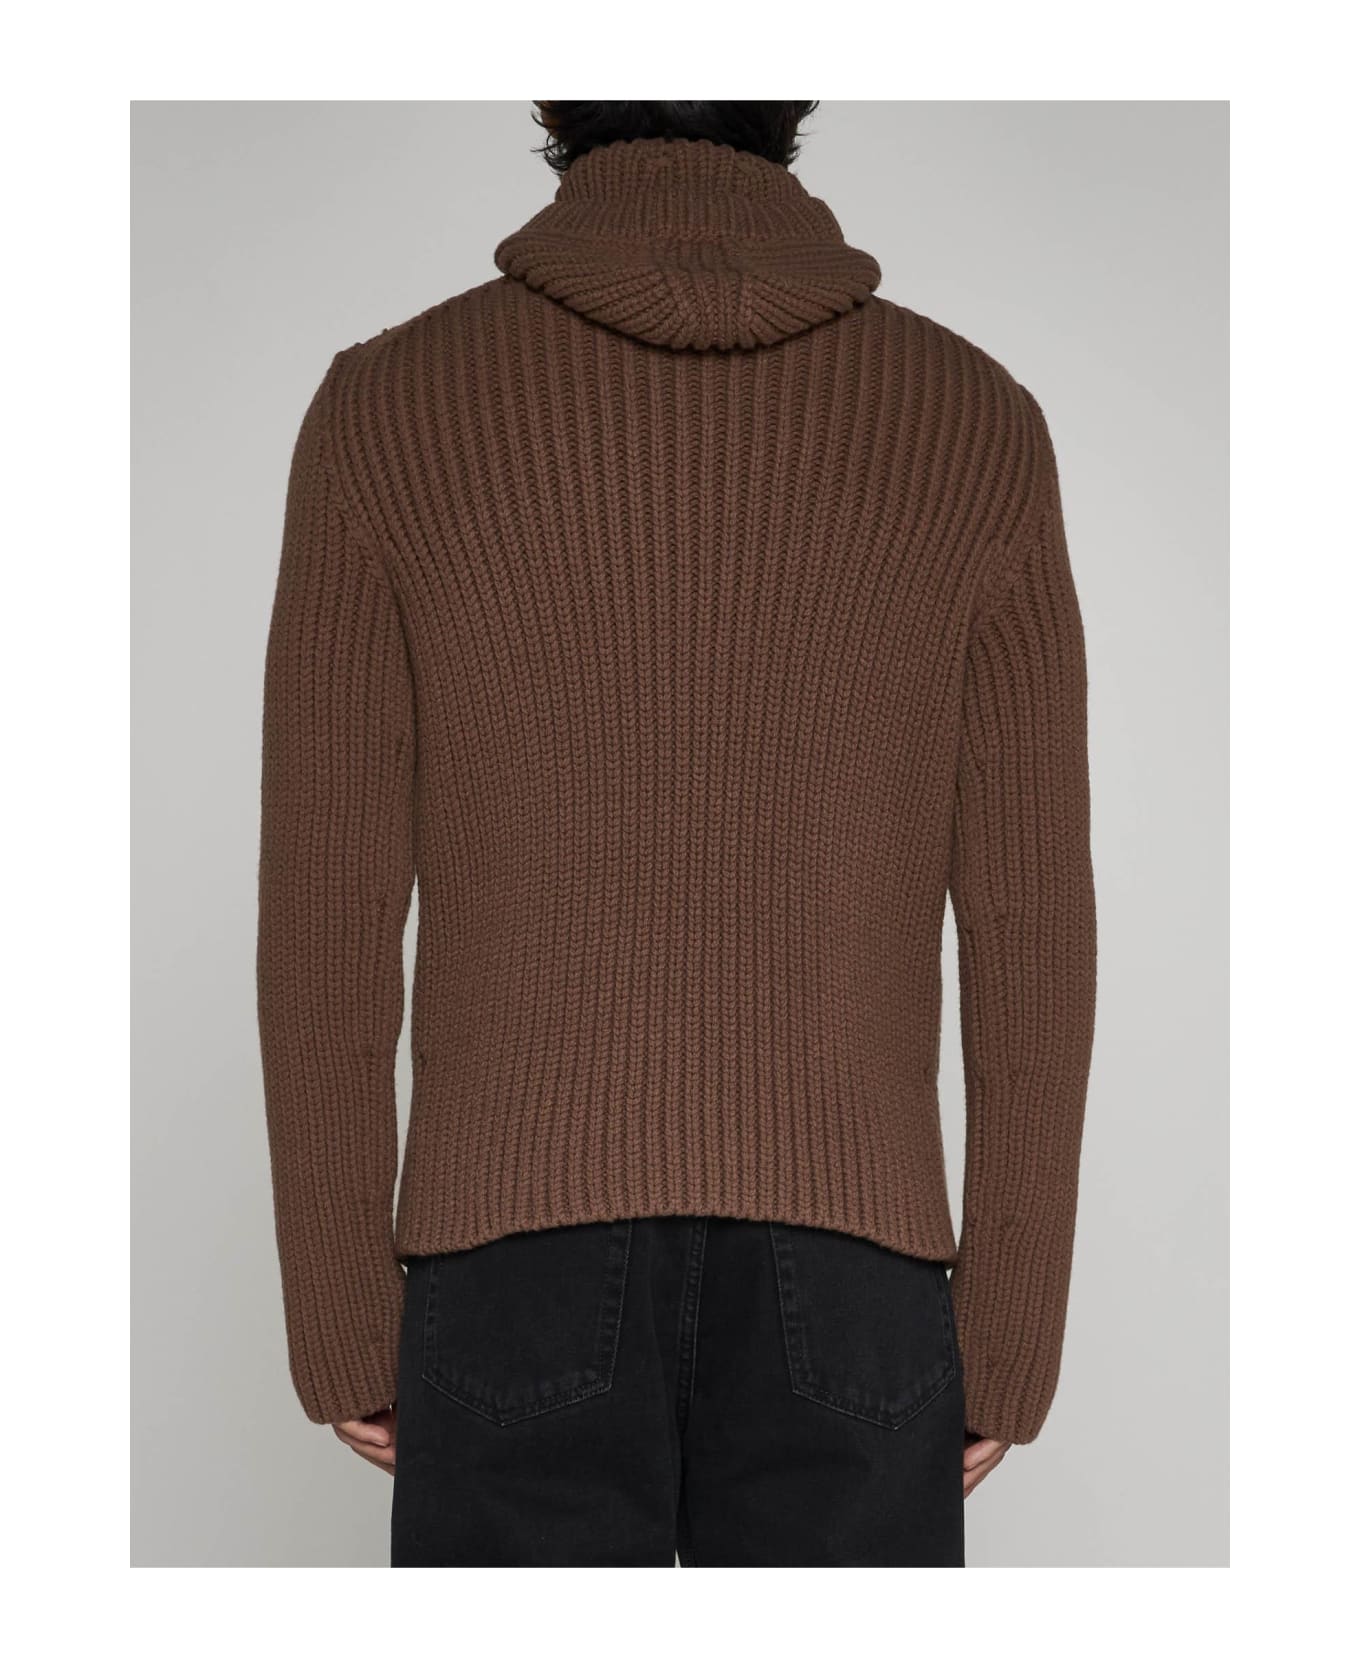 Lanvin Wool And Cashmere Hooded Sweater - Chestnut